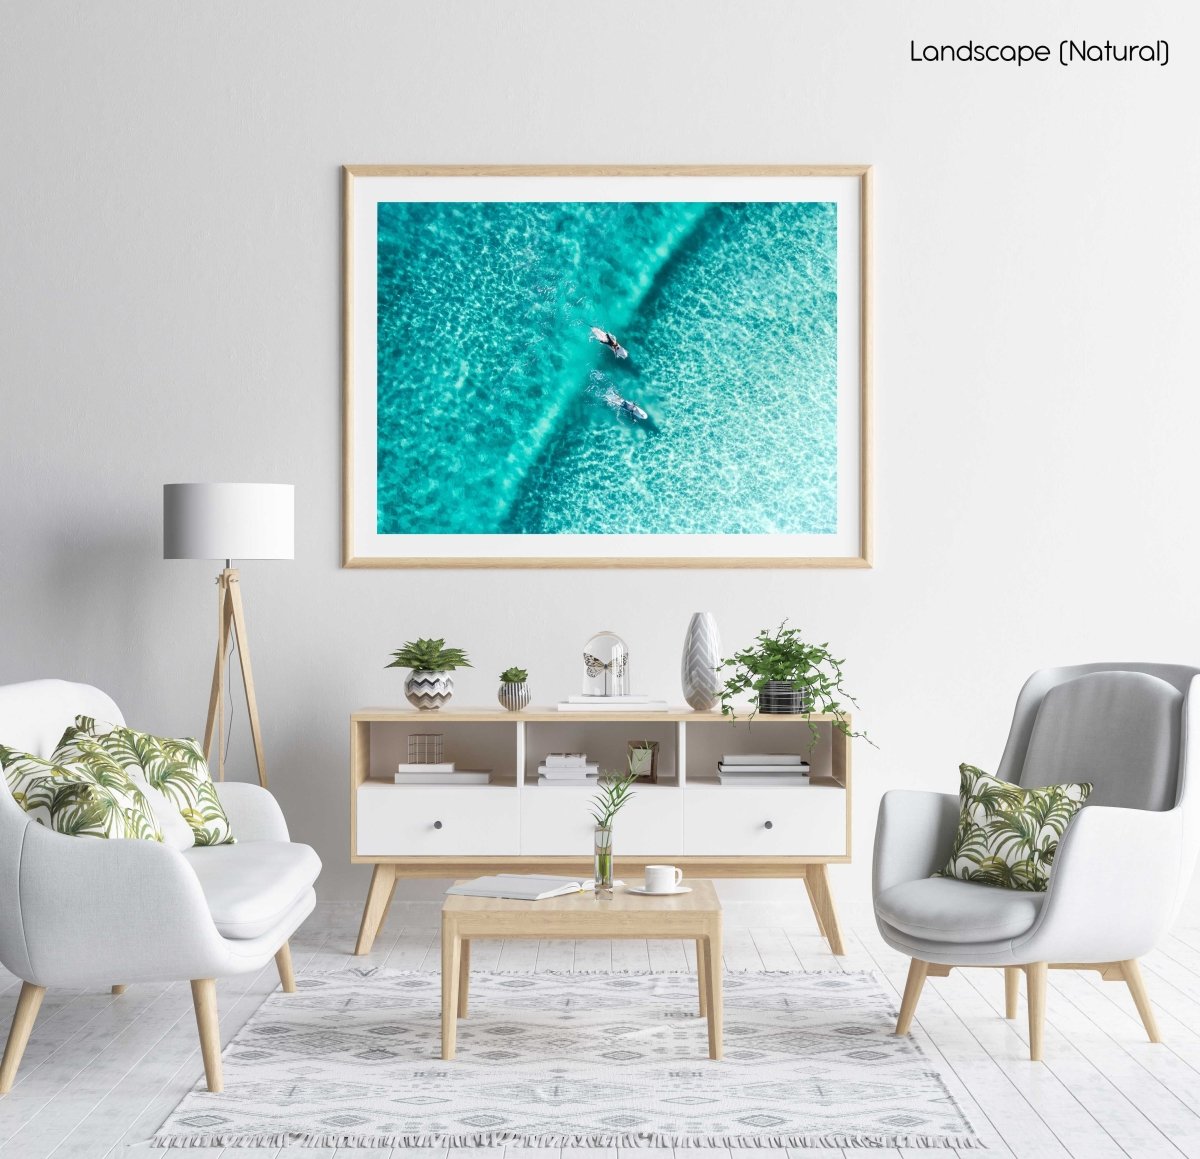 Two surfers paddling on one blue wave from aerial view in a natural fine art frame